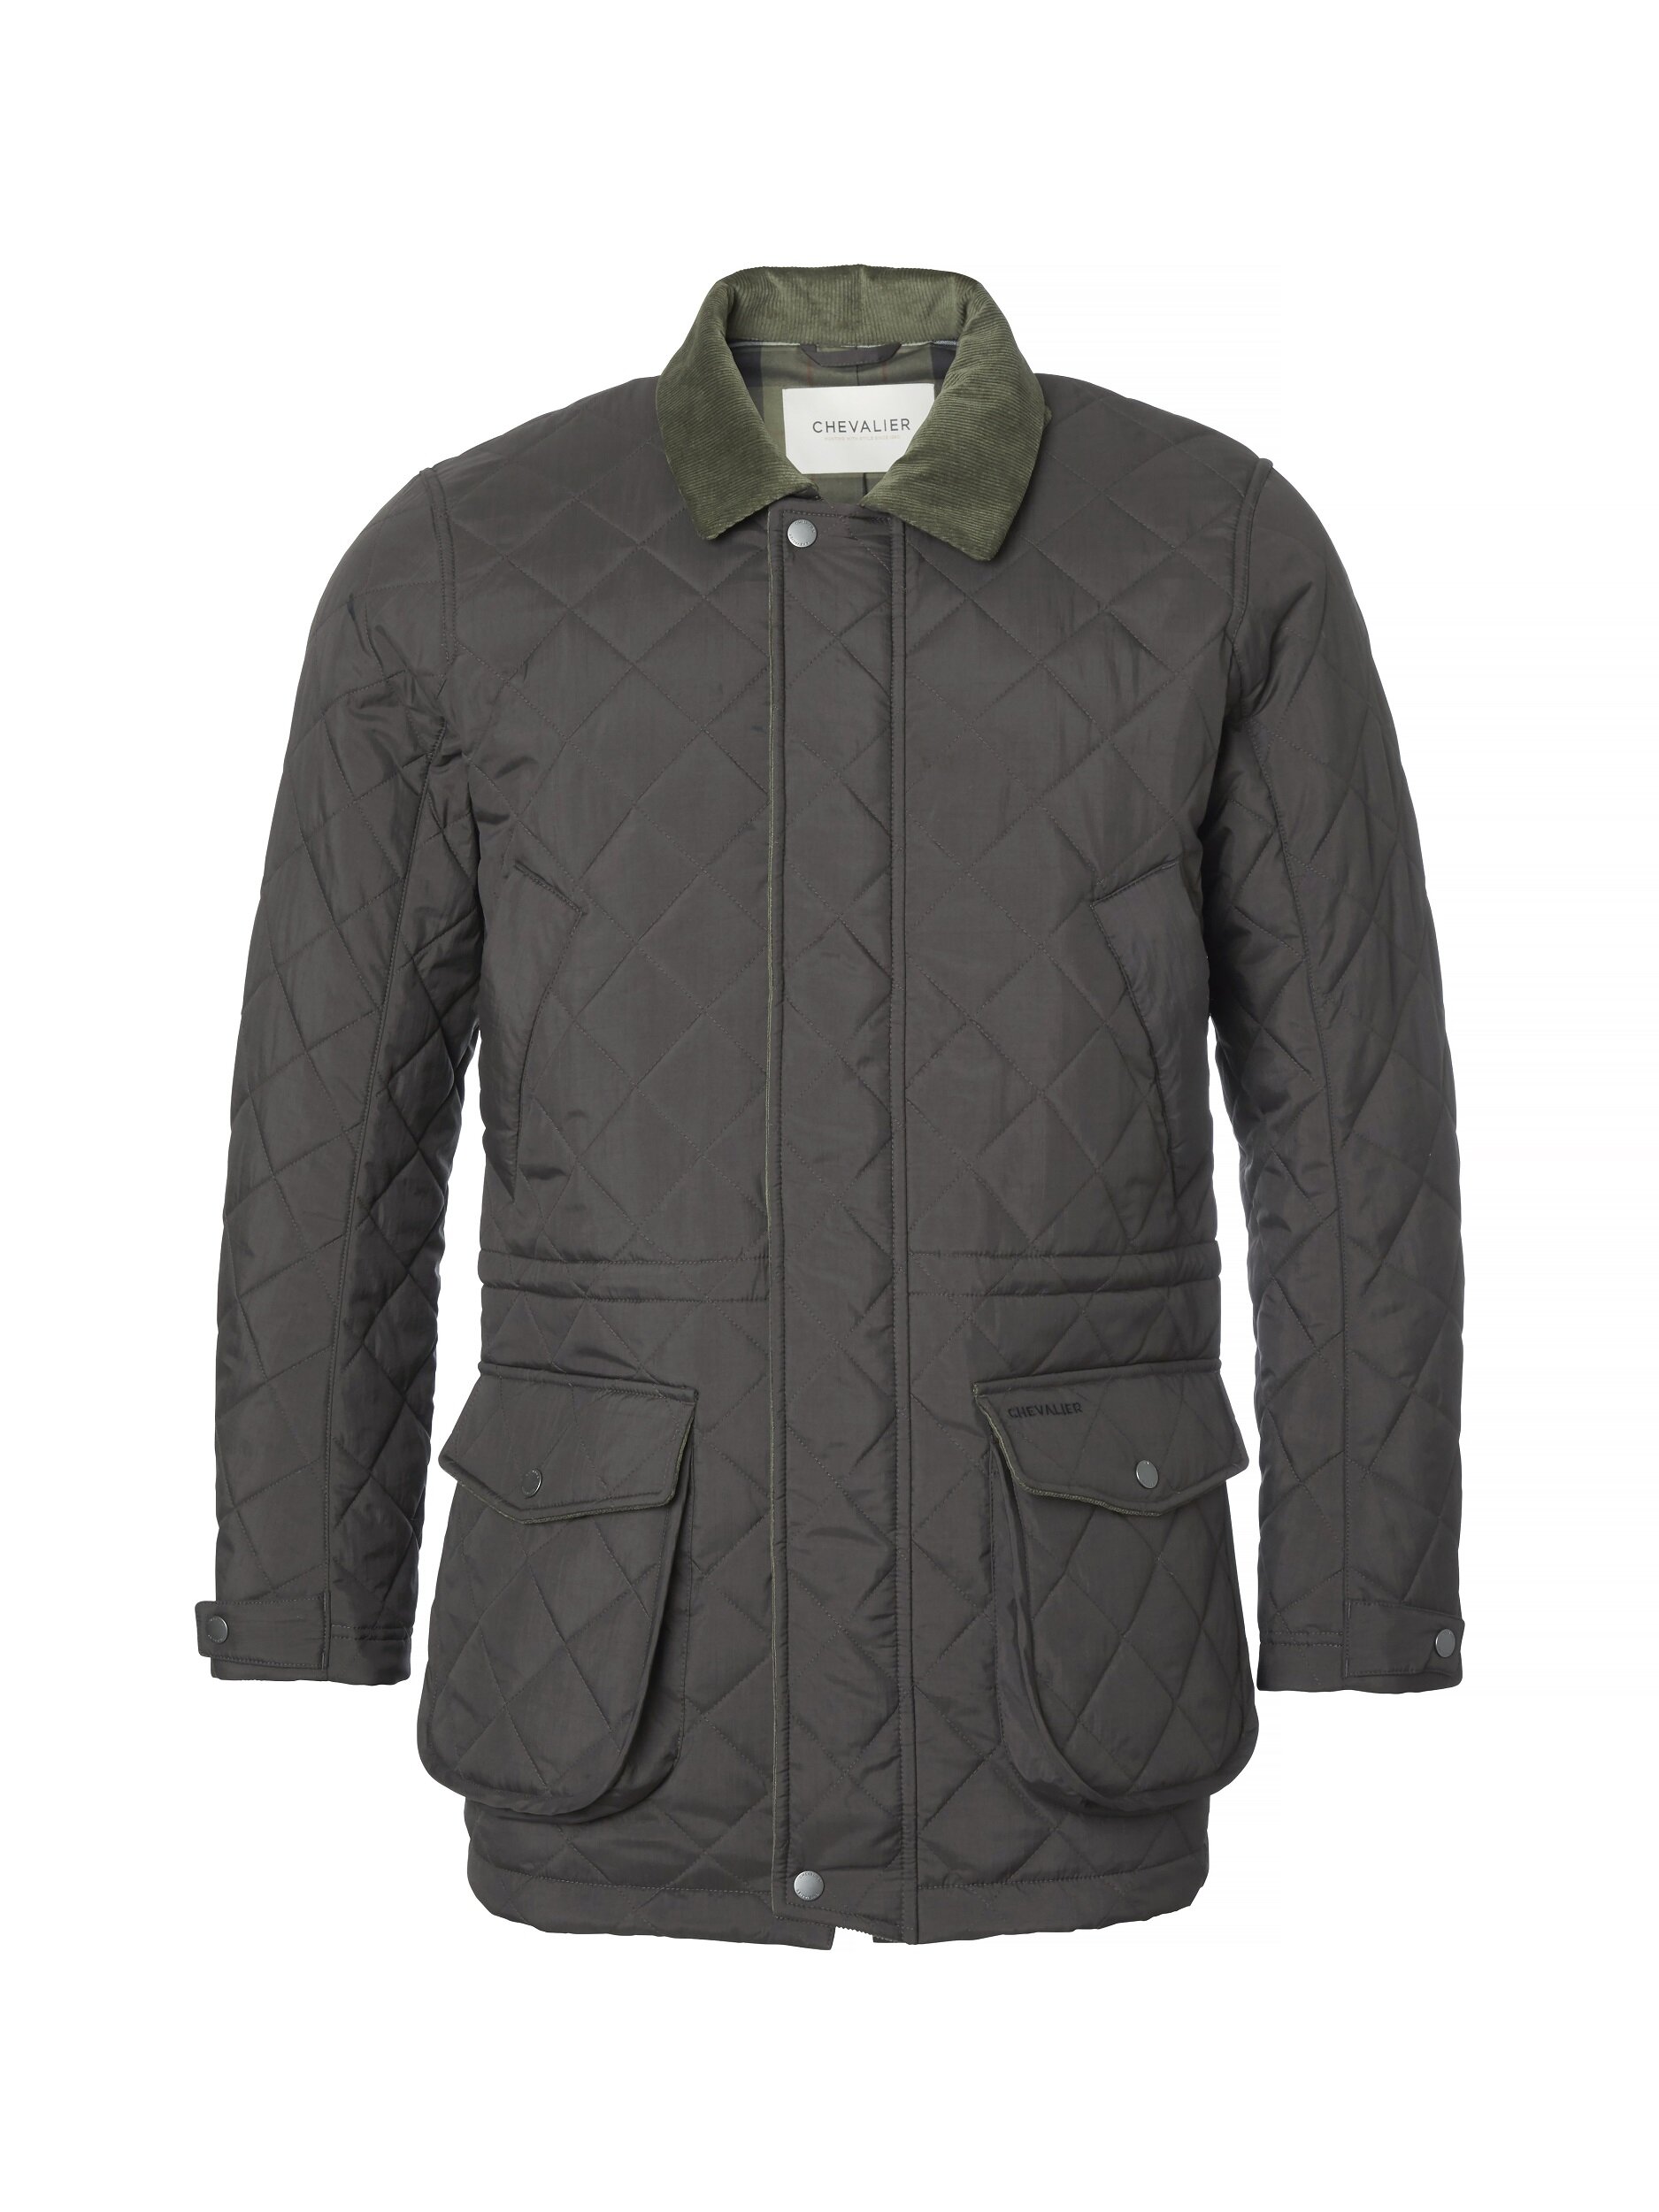 Willot Quilted Jacket Men